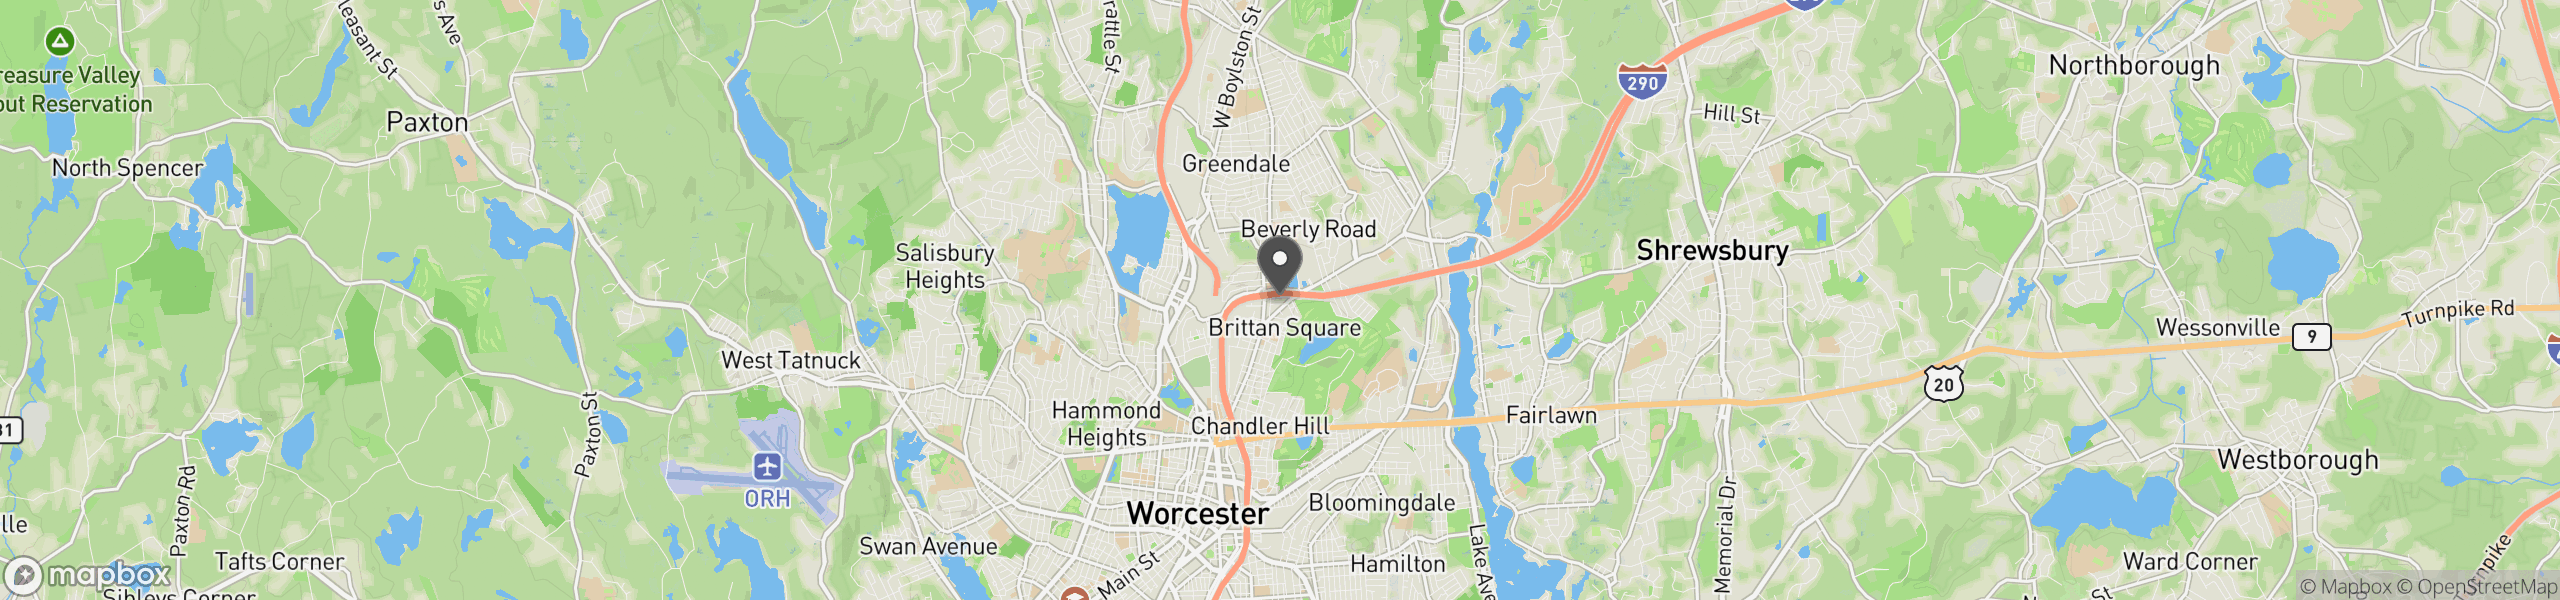 Worcester, MA 01605